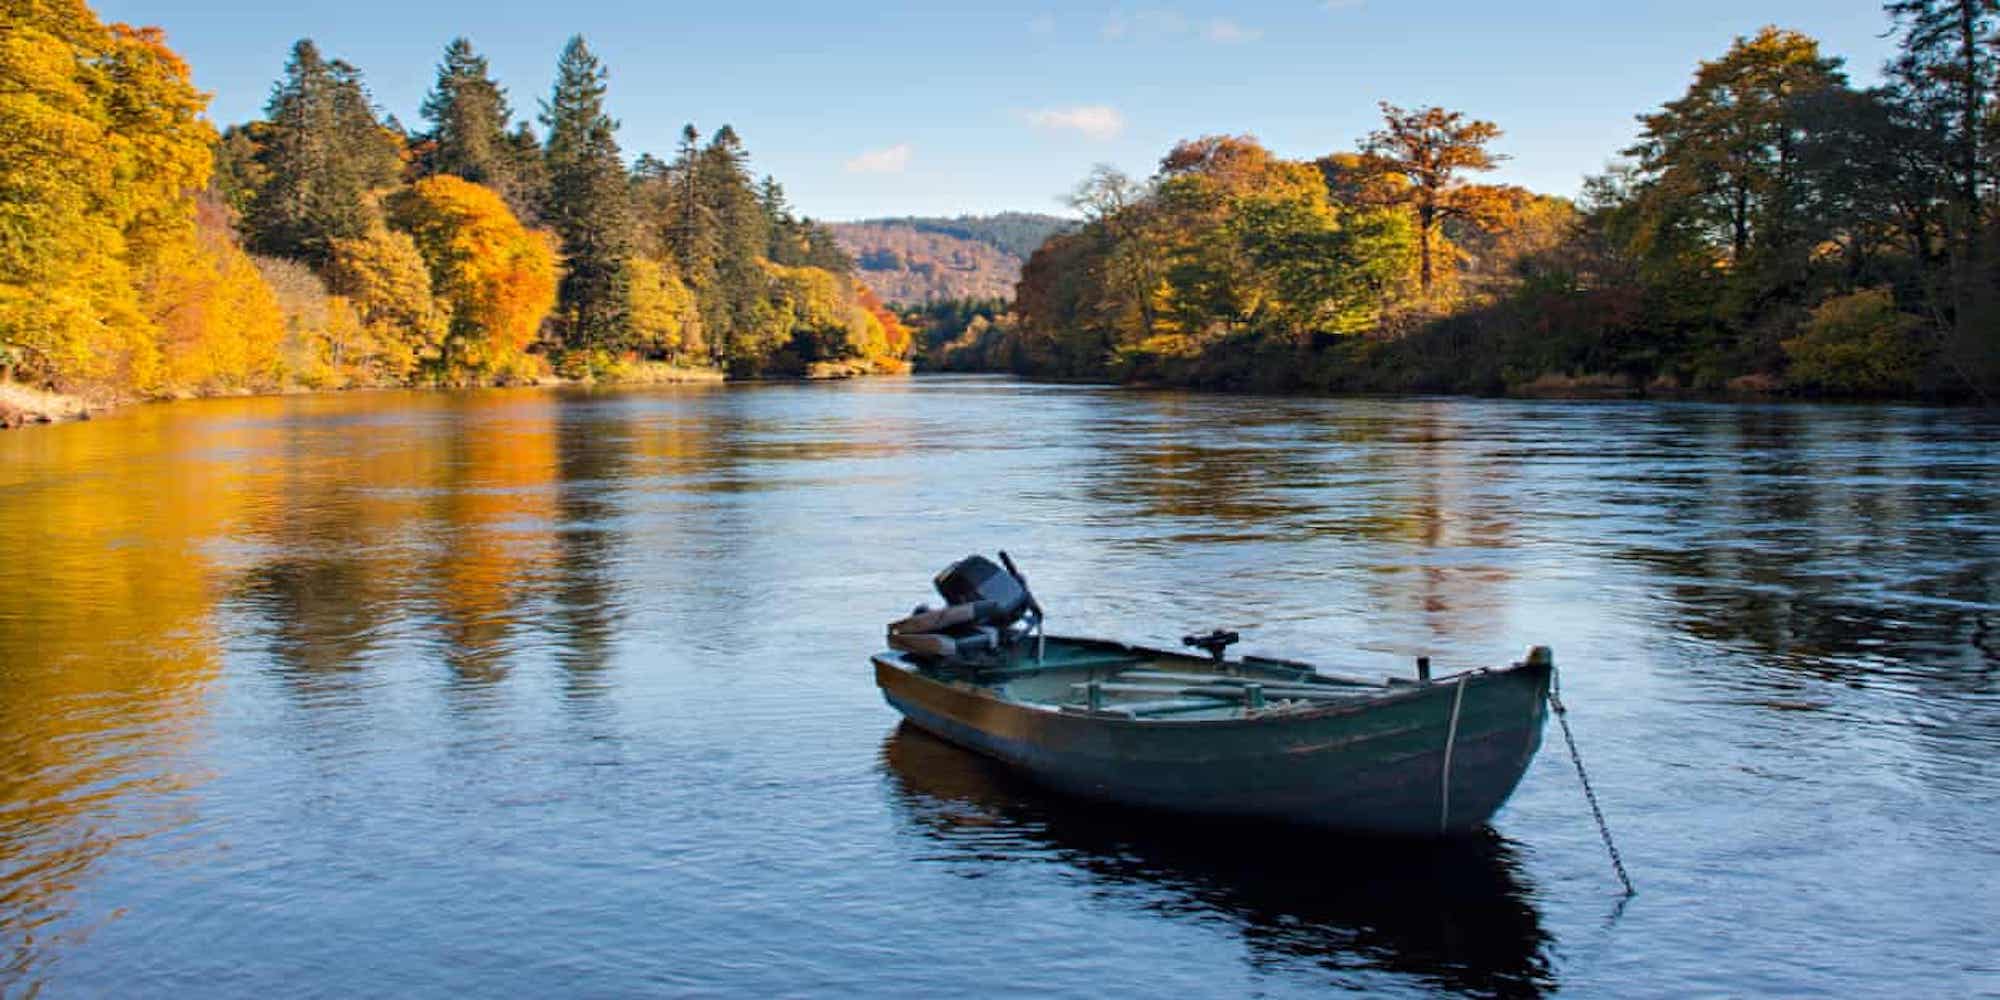 A motorboat on in the foreground of the image on a body of water, in the background are trees in autumnal colours with blue skies above and minimal clouds.